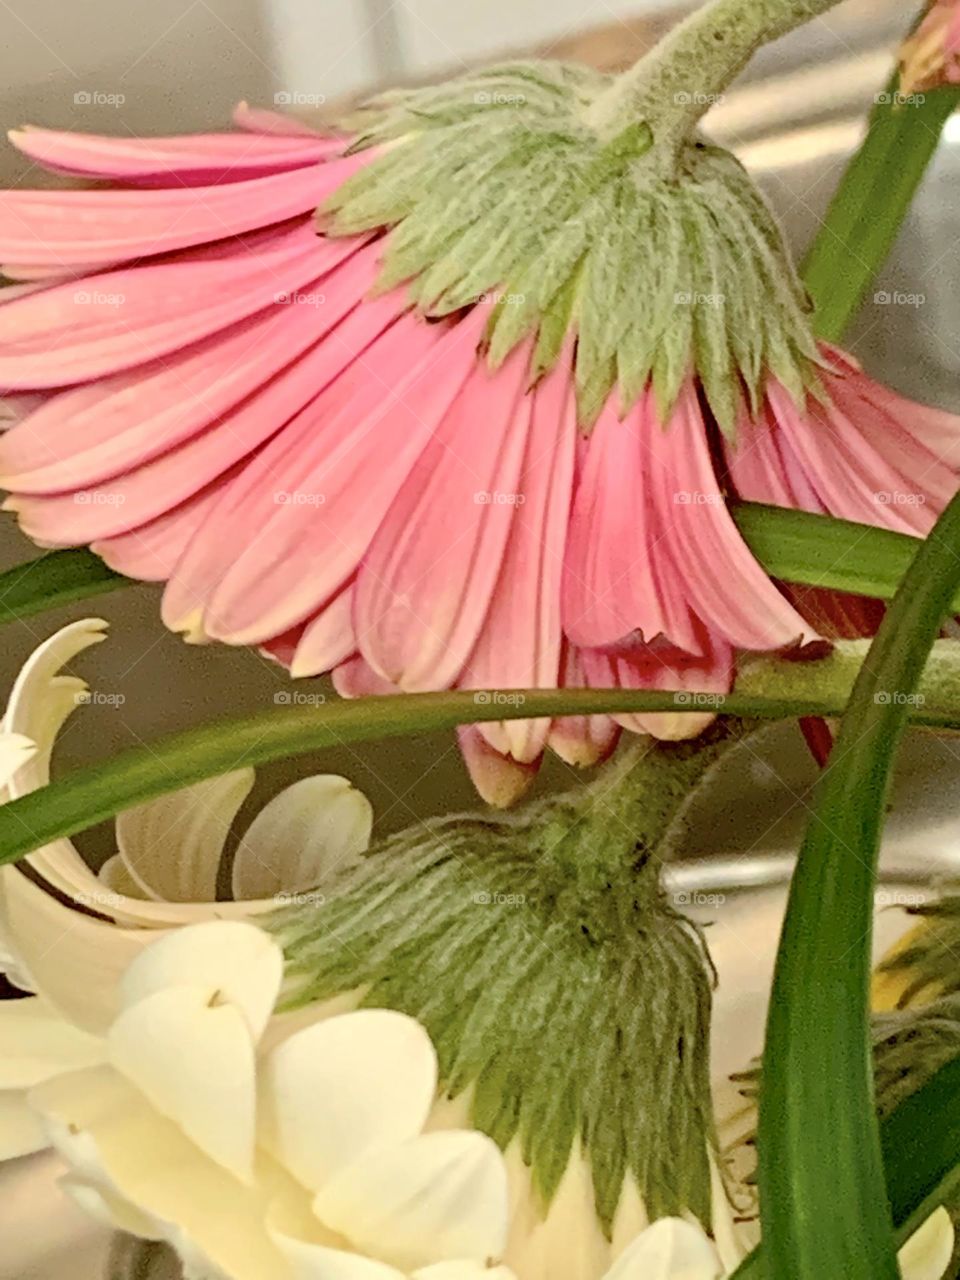 Droopy flower 2